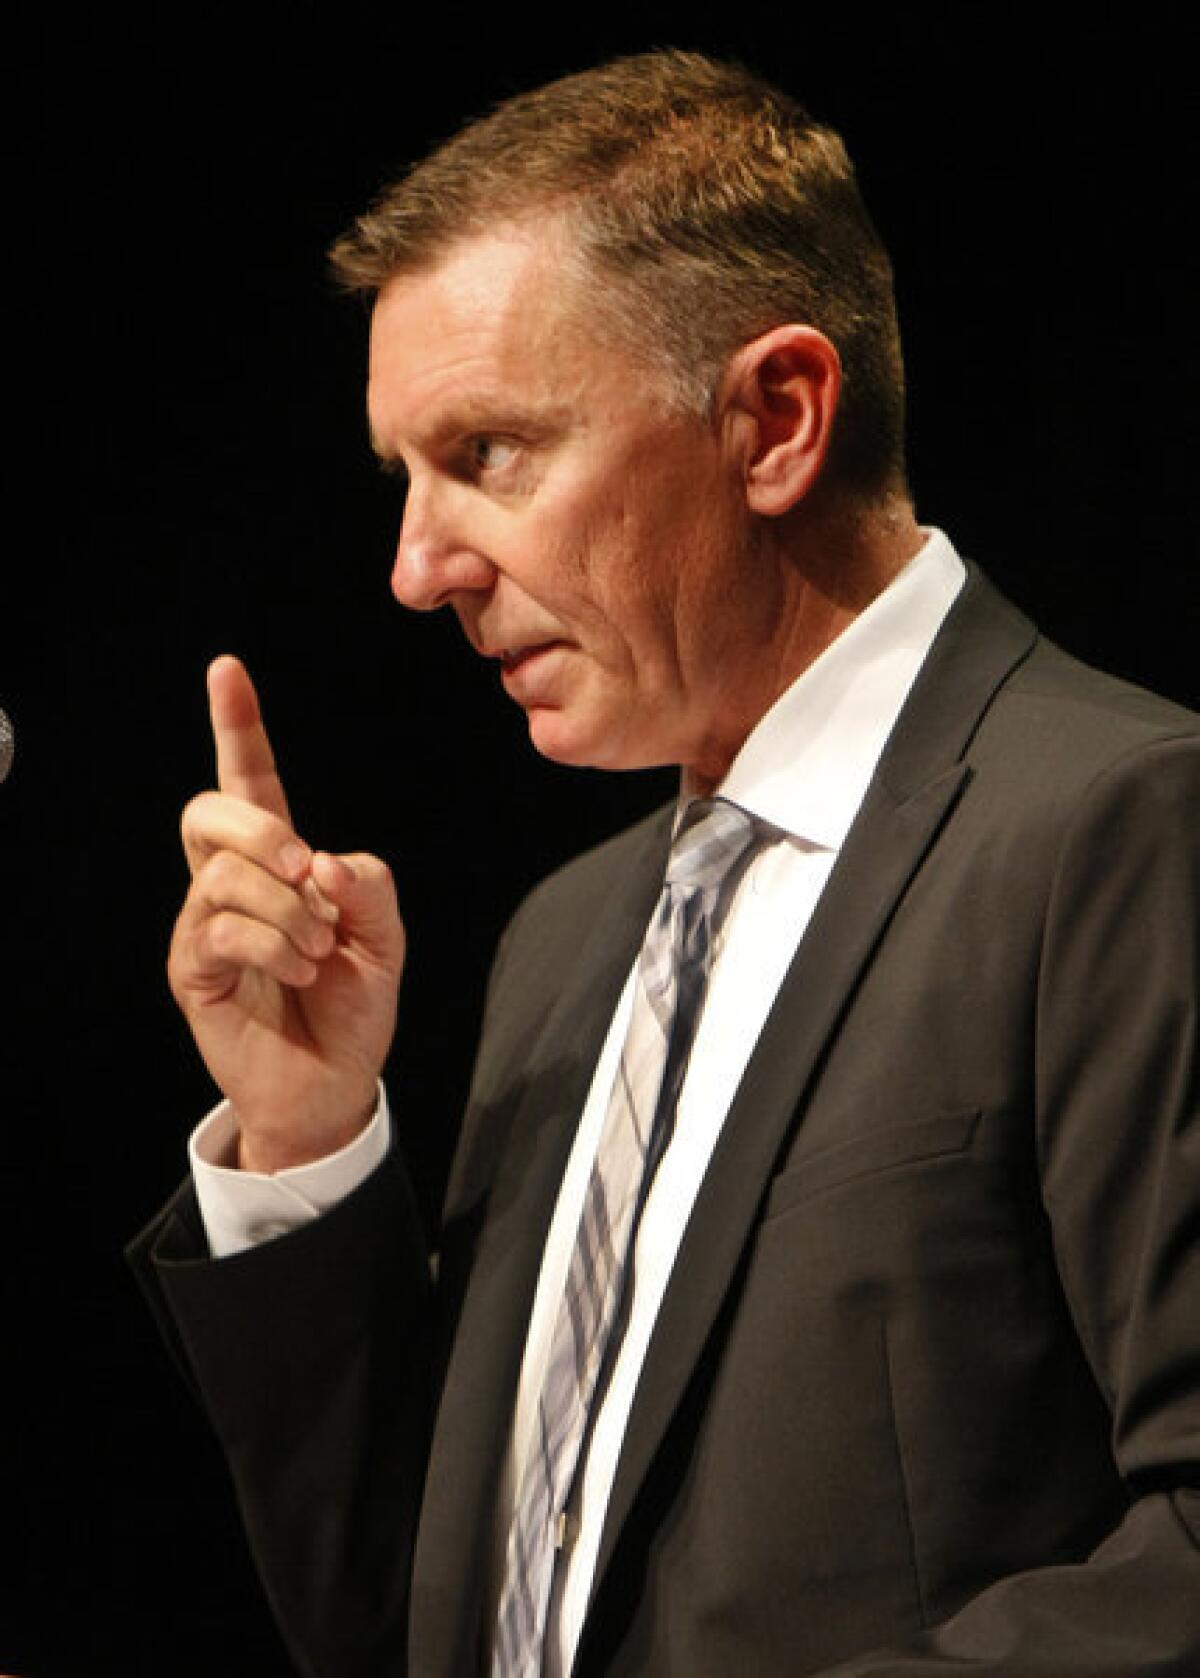 L.A. schools Supt. John Deasy says the district has not violated labor law with its new teacher evaluation system.